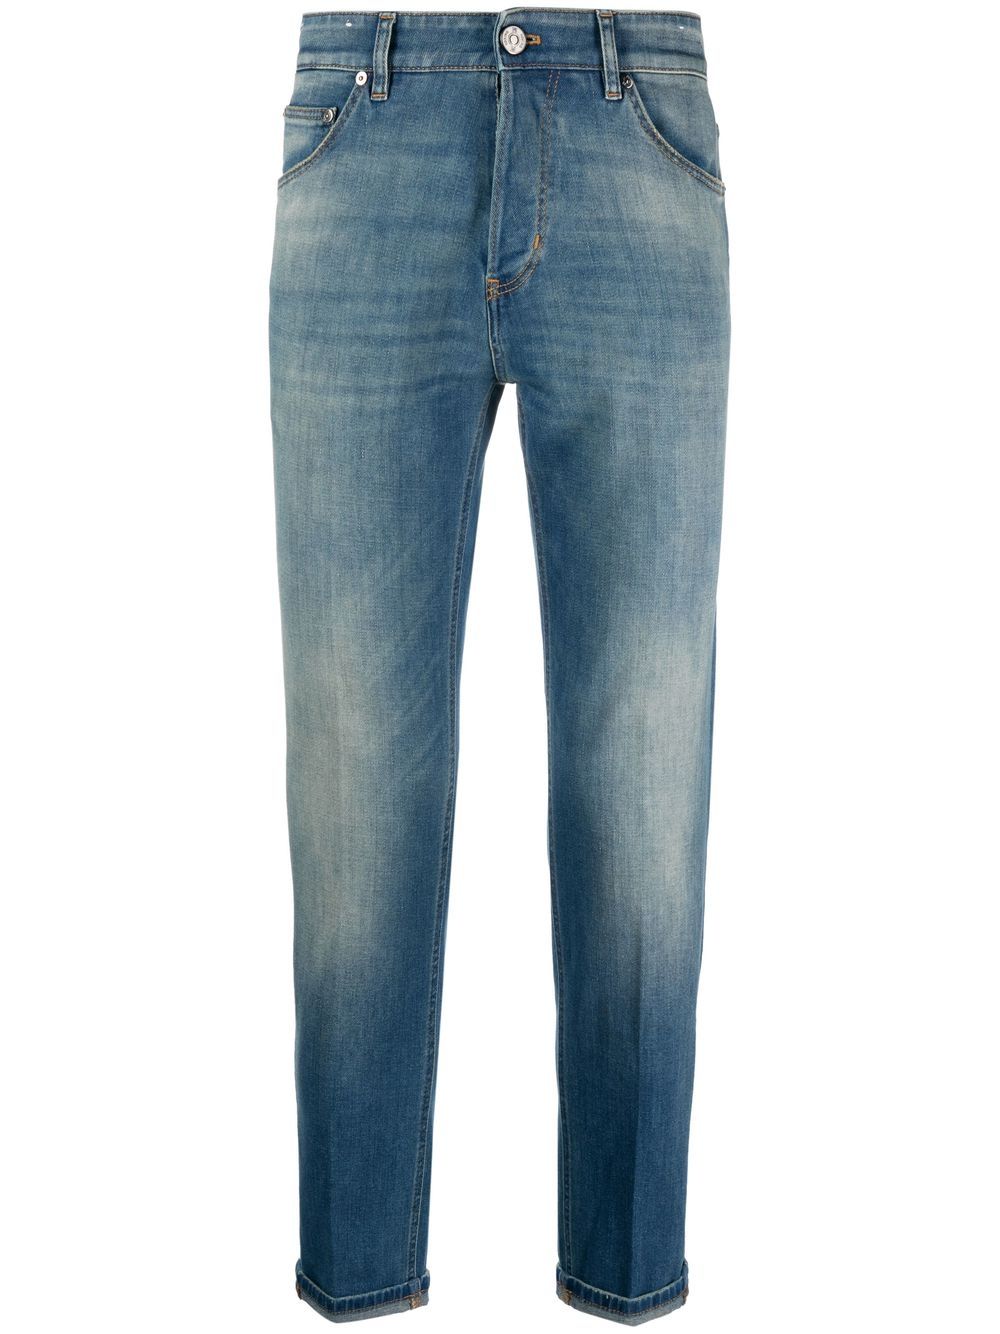 Pt Torino Washed Fitted Jeans In Blue